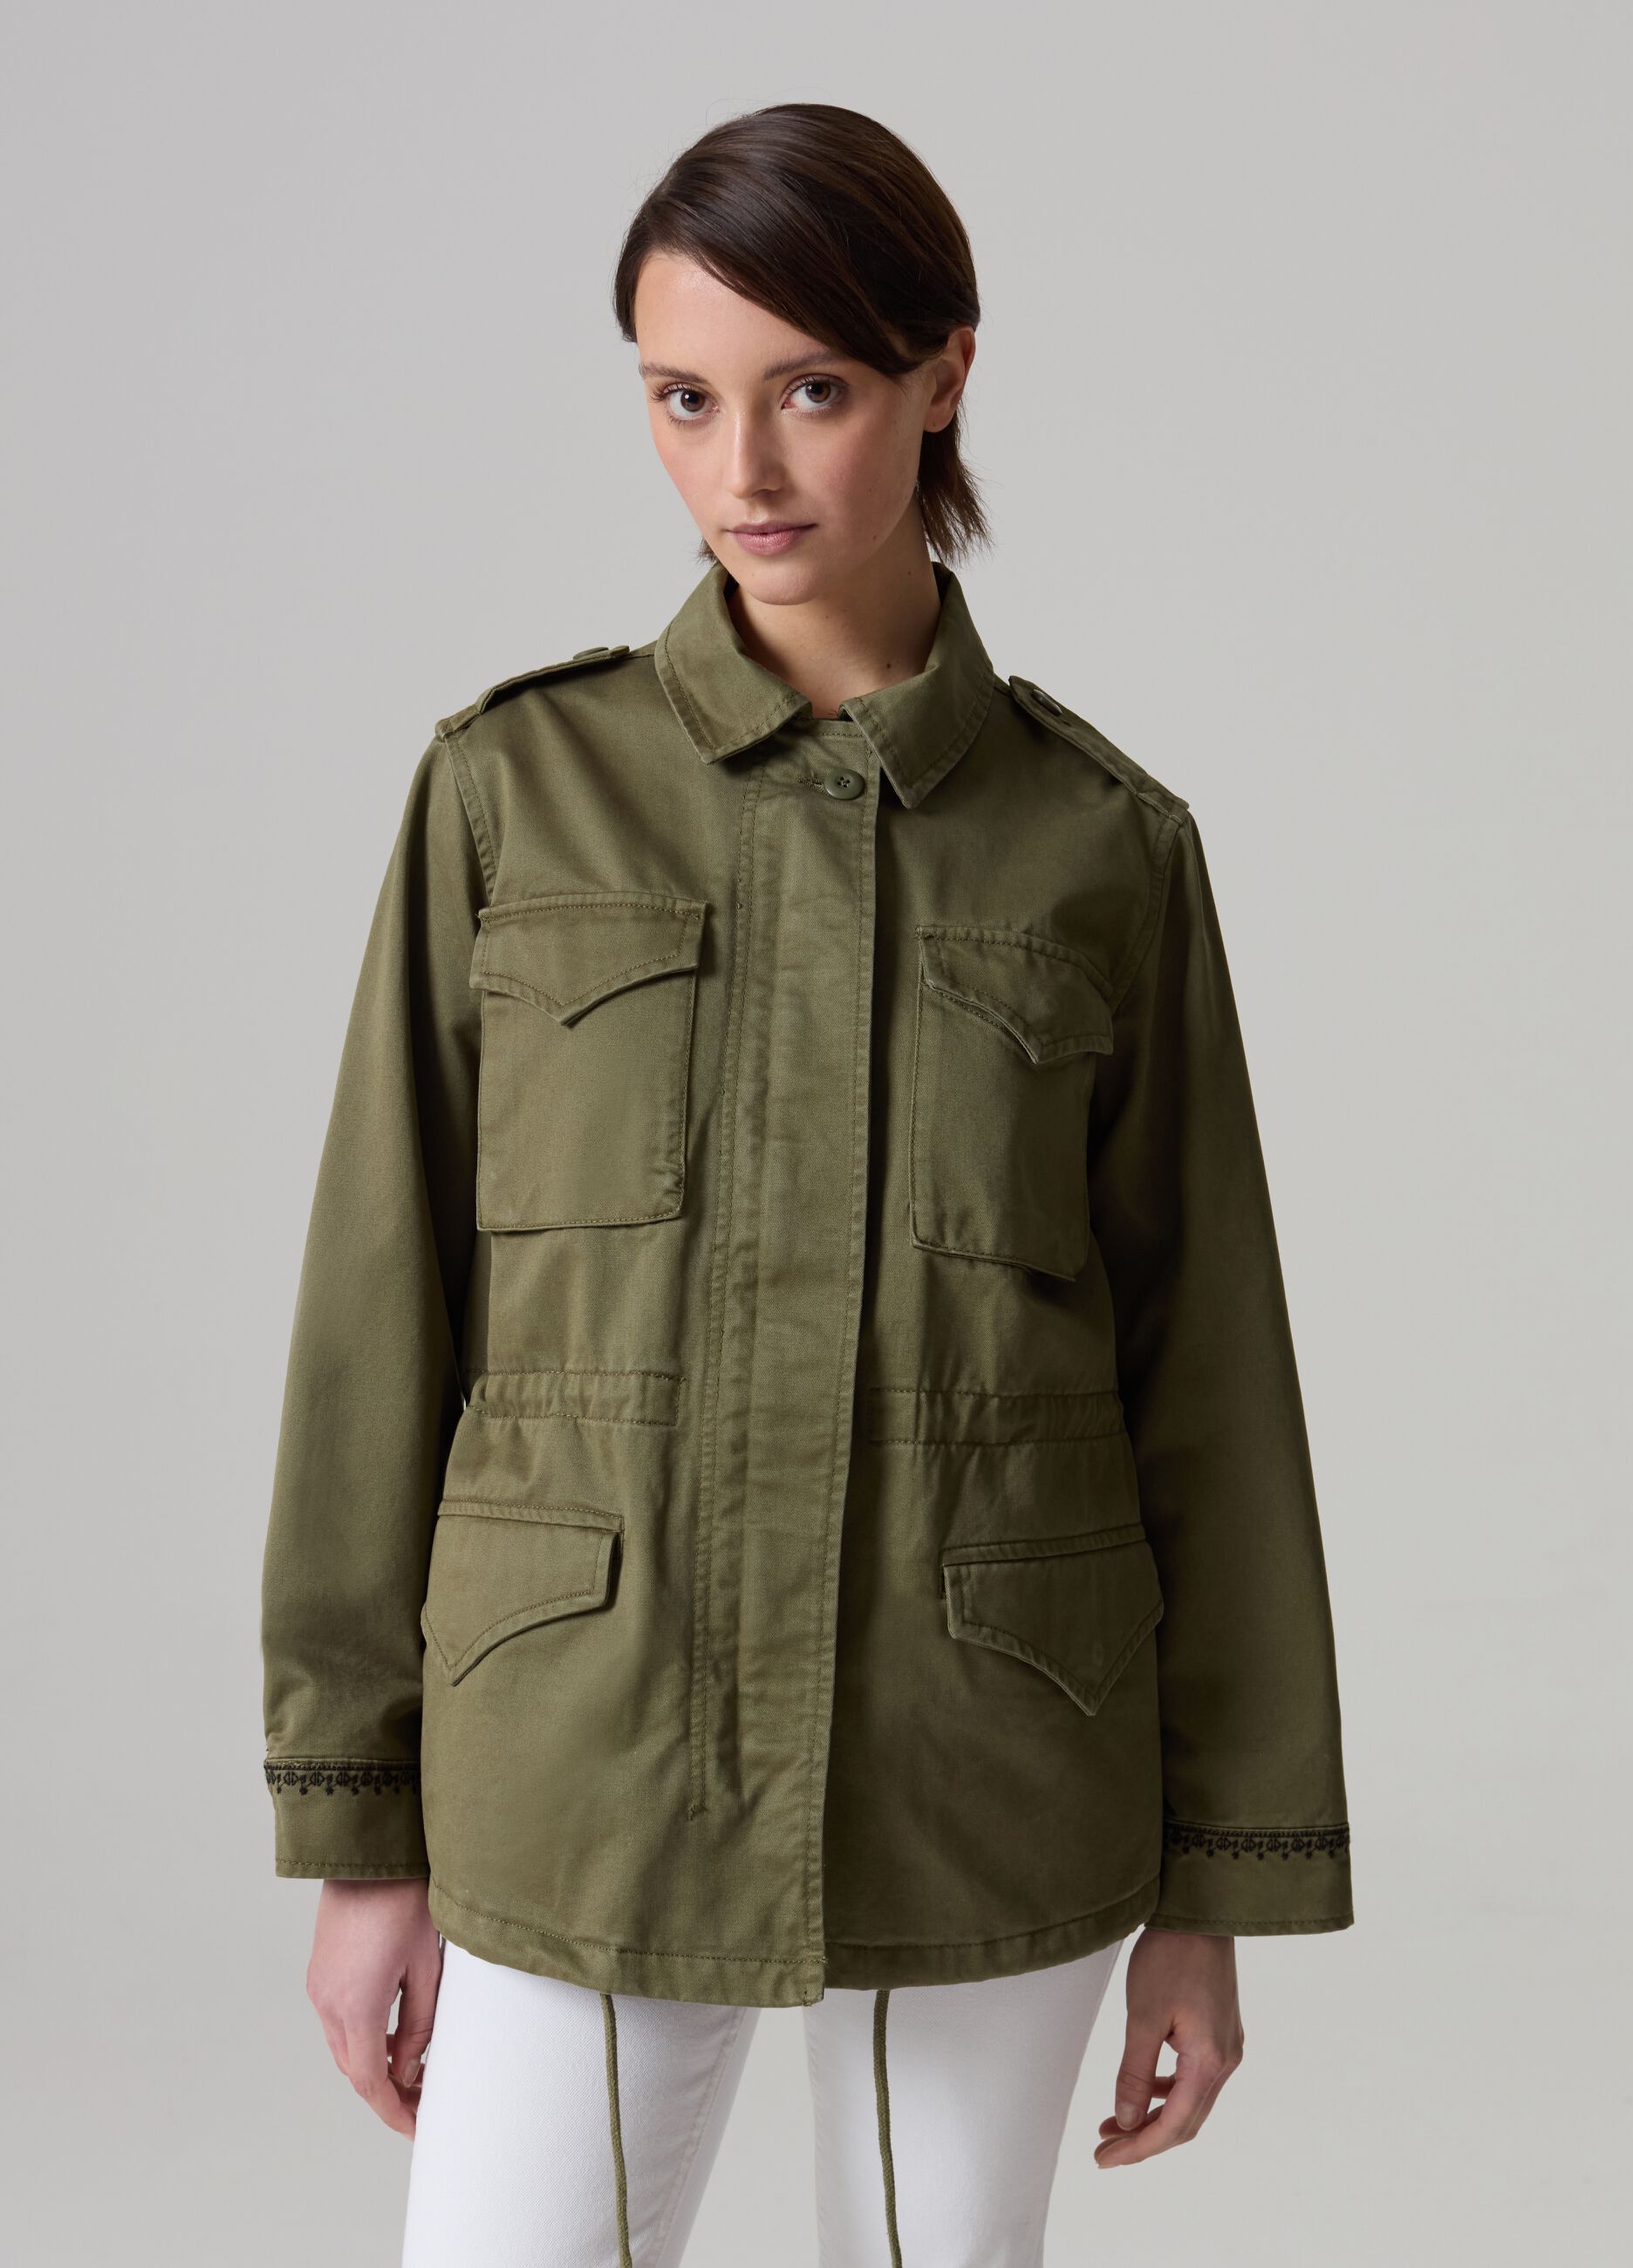 Safari jacket with embroidered details